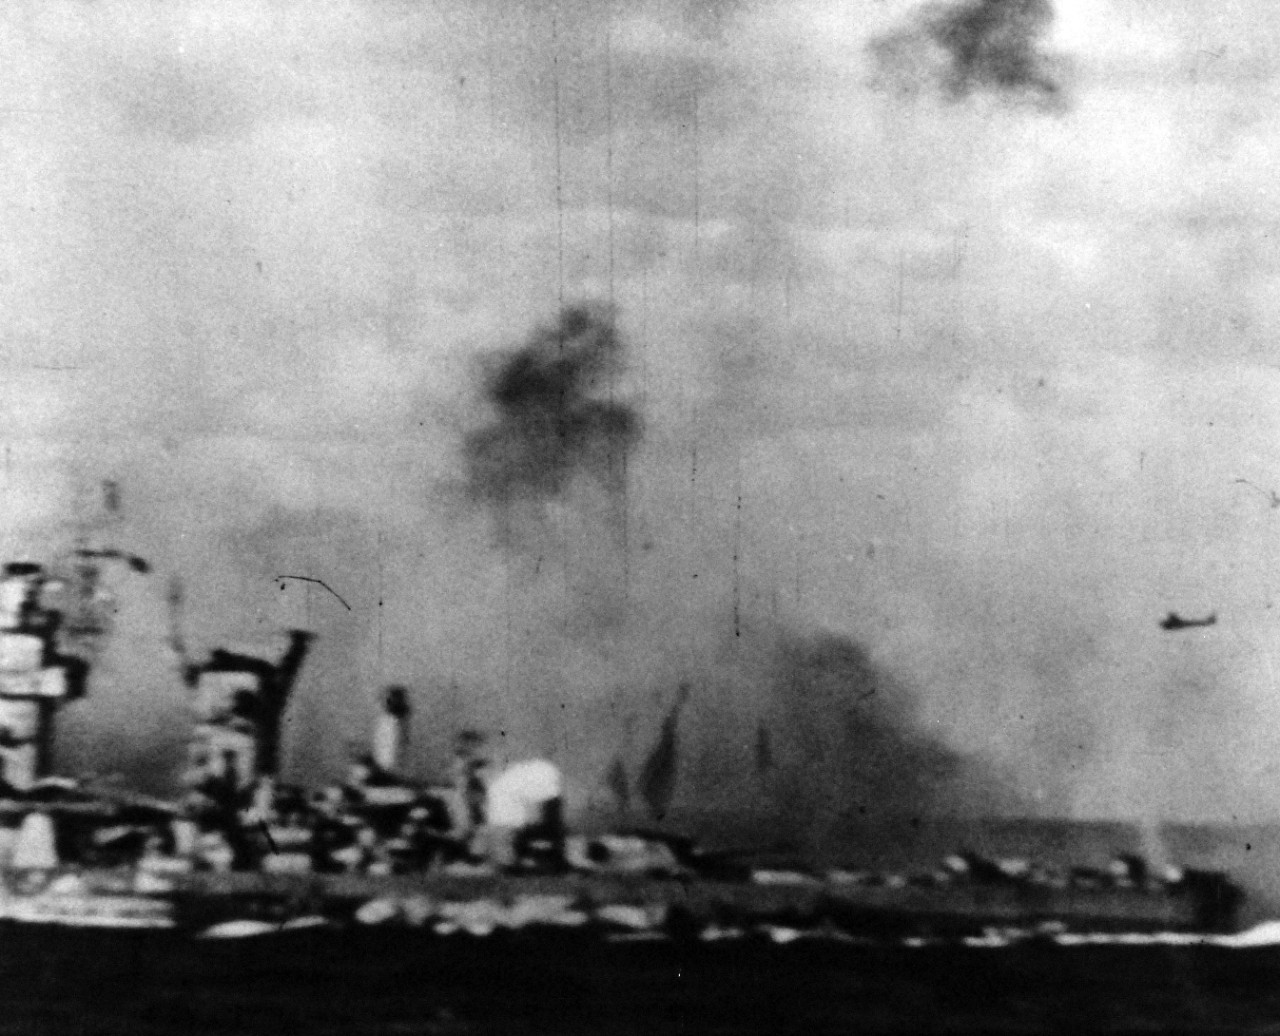 80-G-49696: Japanese Kamikaze Attack, June 1945. Japanese suicide planes streak near a Navy battleship with anti-aircraft batteries blazing at the enemy plane.   Released June 28, 1945.   Official U.S. Navy photograph, now in the collections of the National Archives.  